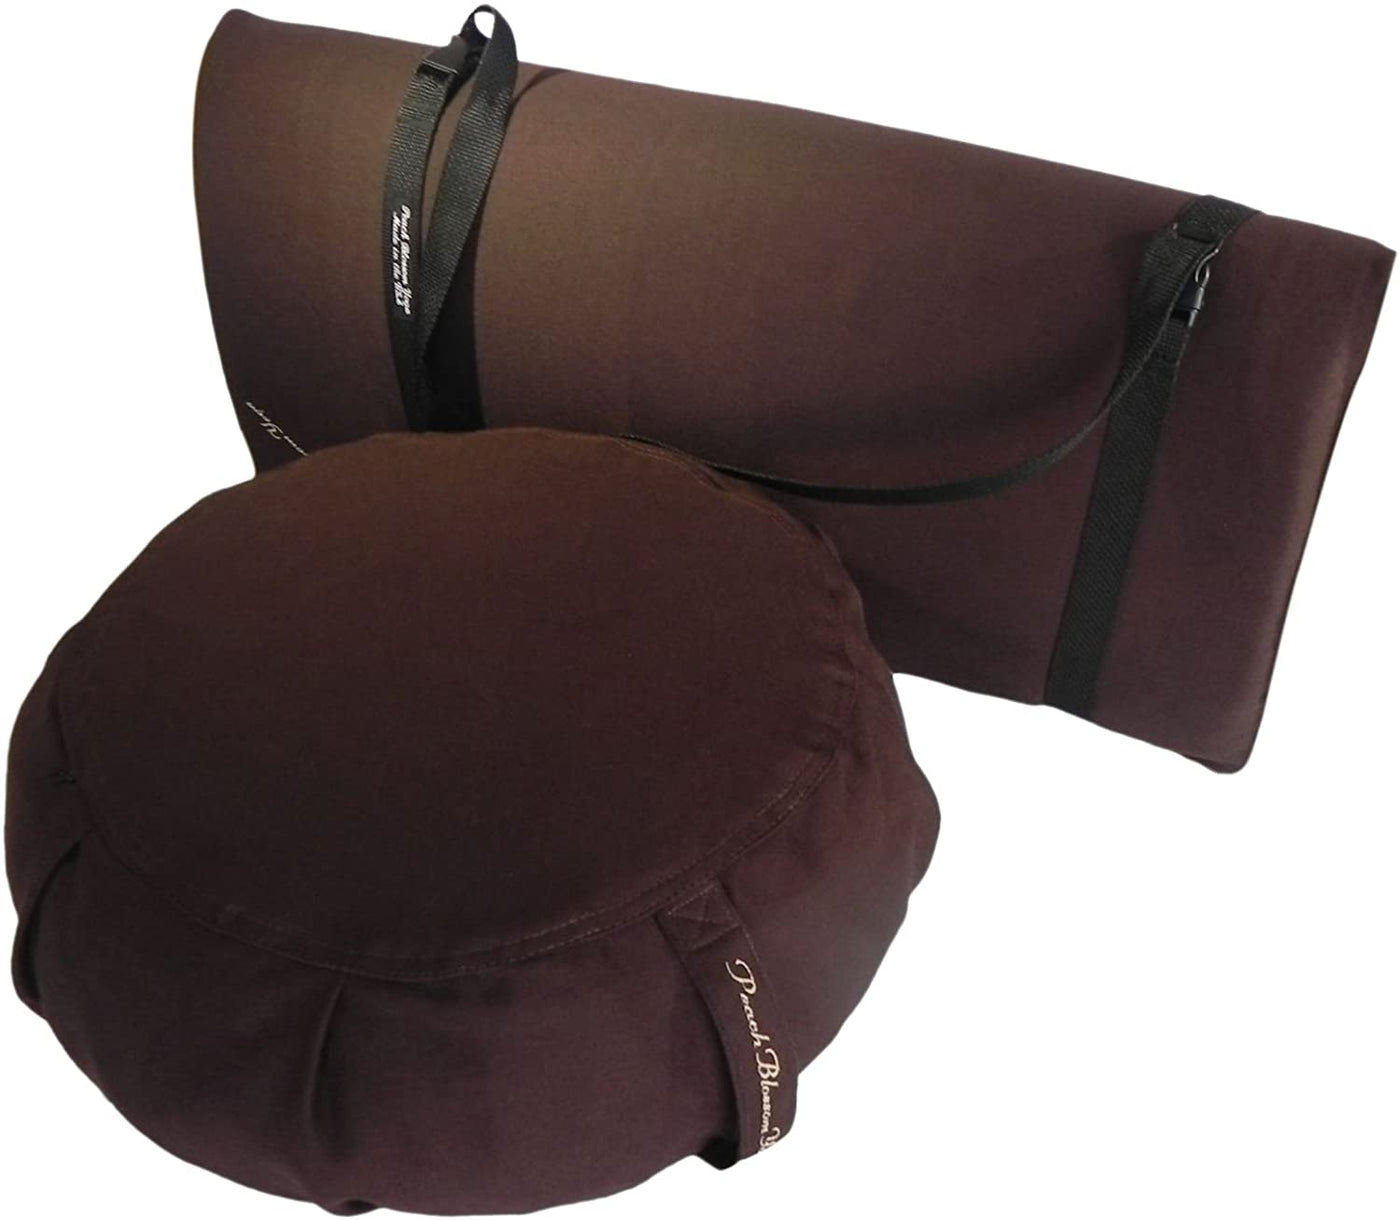 3 Piece Restorative Yoga Set includes Zafu Meditation Pillow Buckwheat Hull filled, Zabuton Cushion 26"x26" with 3" Foam, and Double Buckle Strap, Removable Covers for easy care.